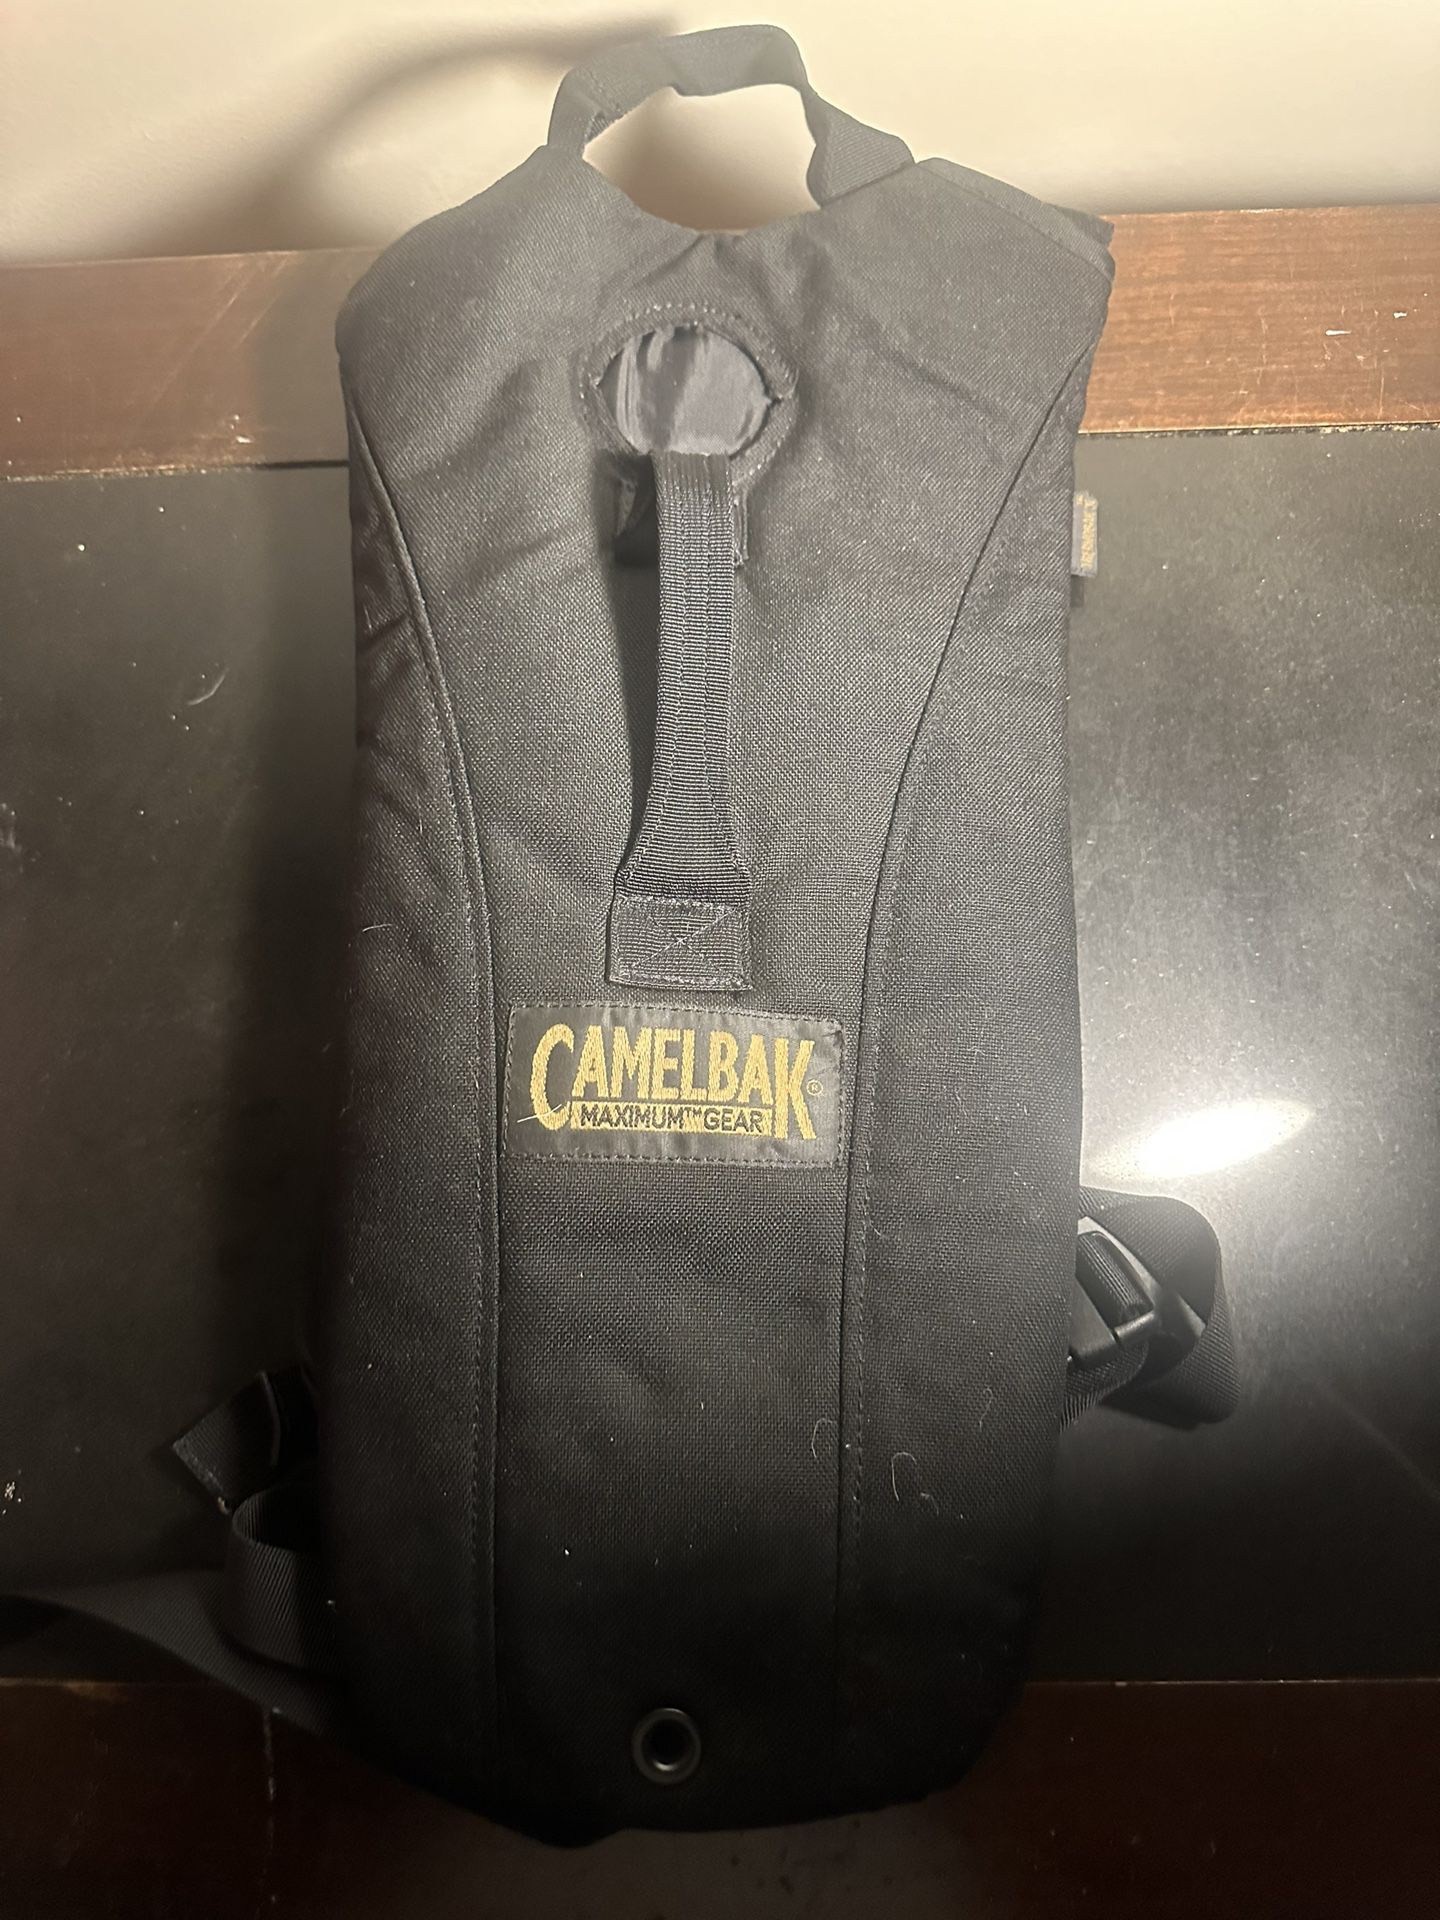 Camelback Hiking Gear 25$ 3 Liter Hydration Pack 30$